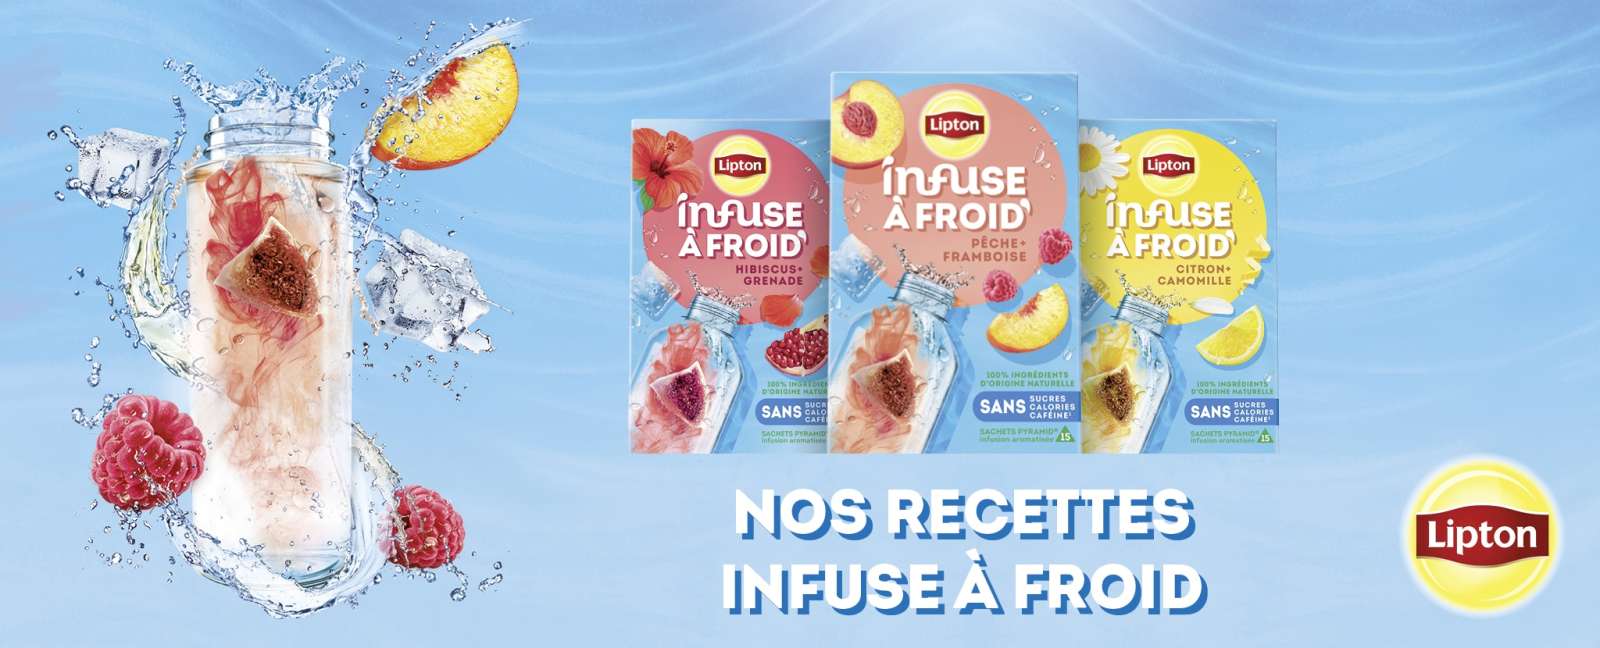 8539 lipton infuse a froid banniere